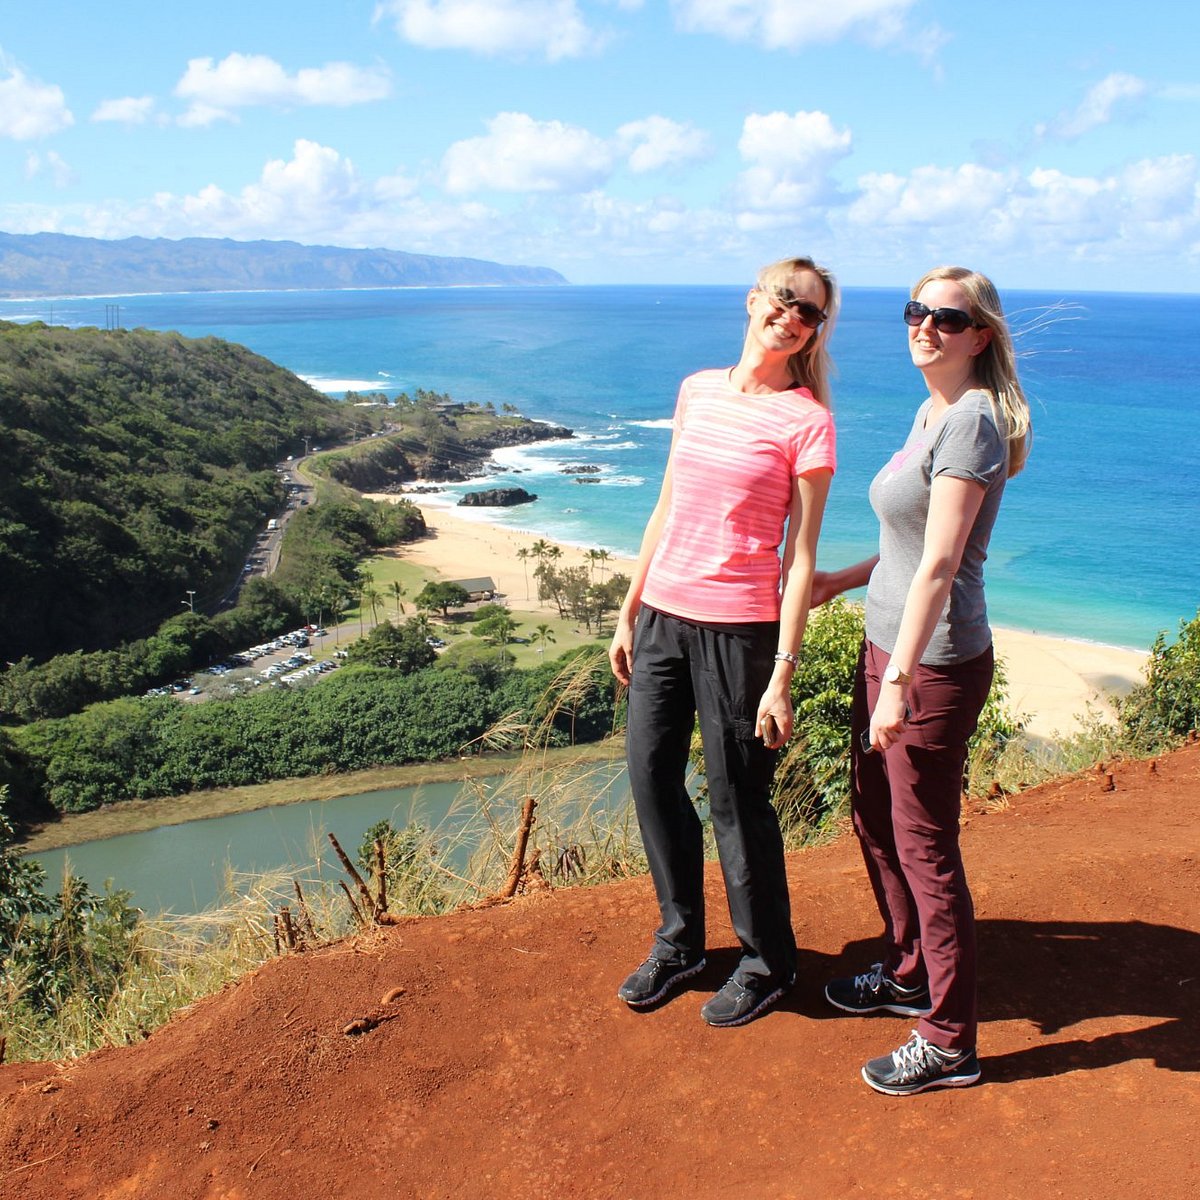 Oahu Island Experience feat. North Shore (Small Group Tour)